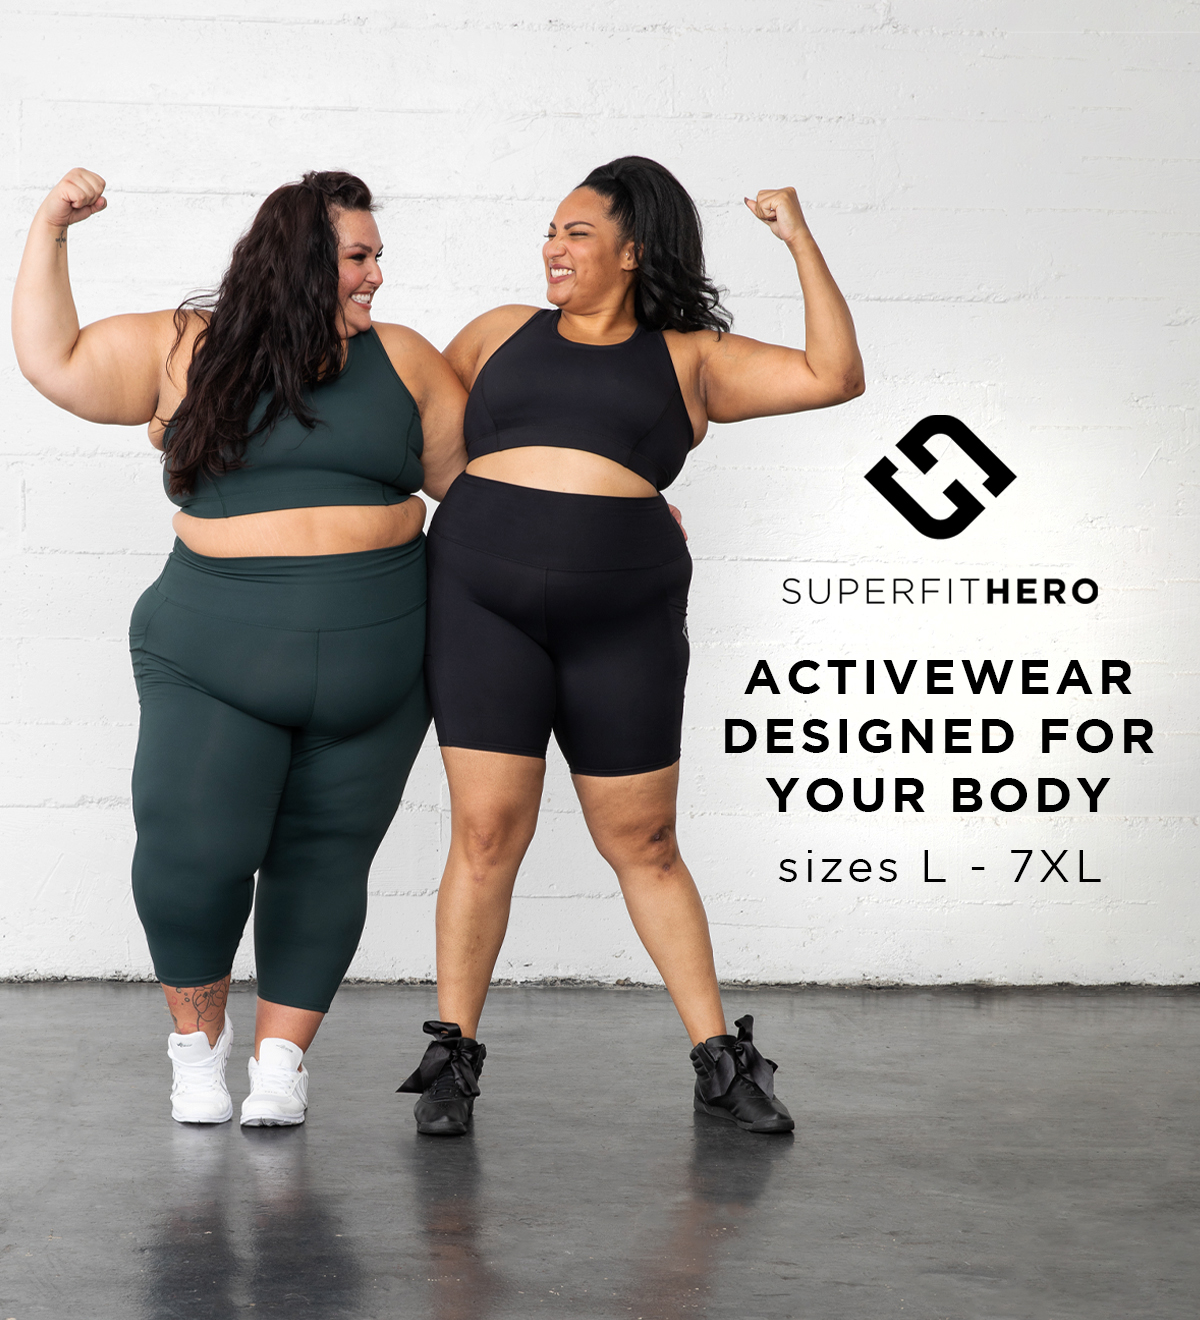 Body Positive and Size Inclusive Fitness Trainers – Superfit Hero